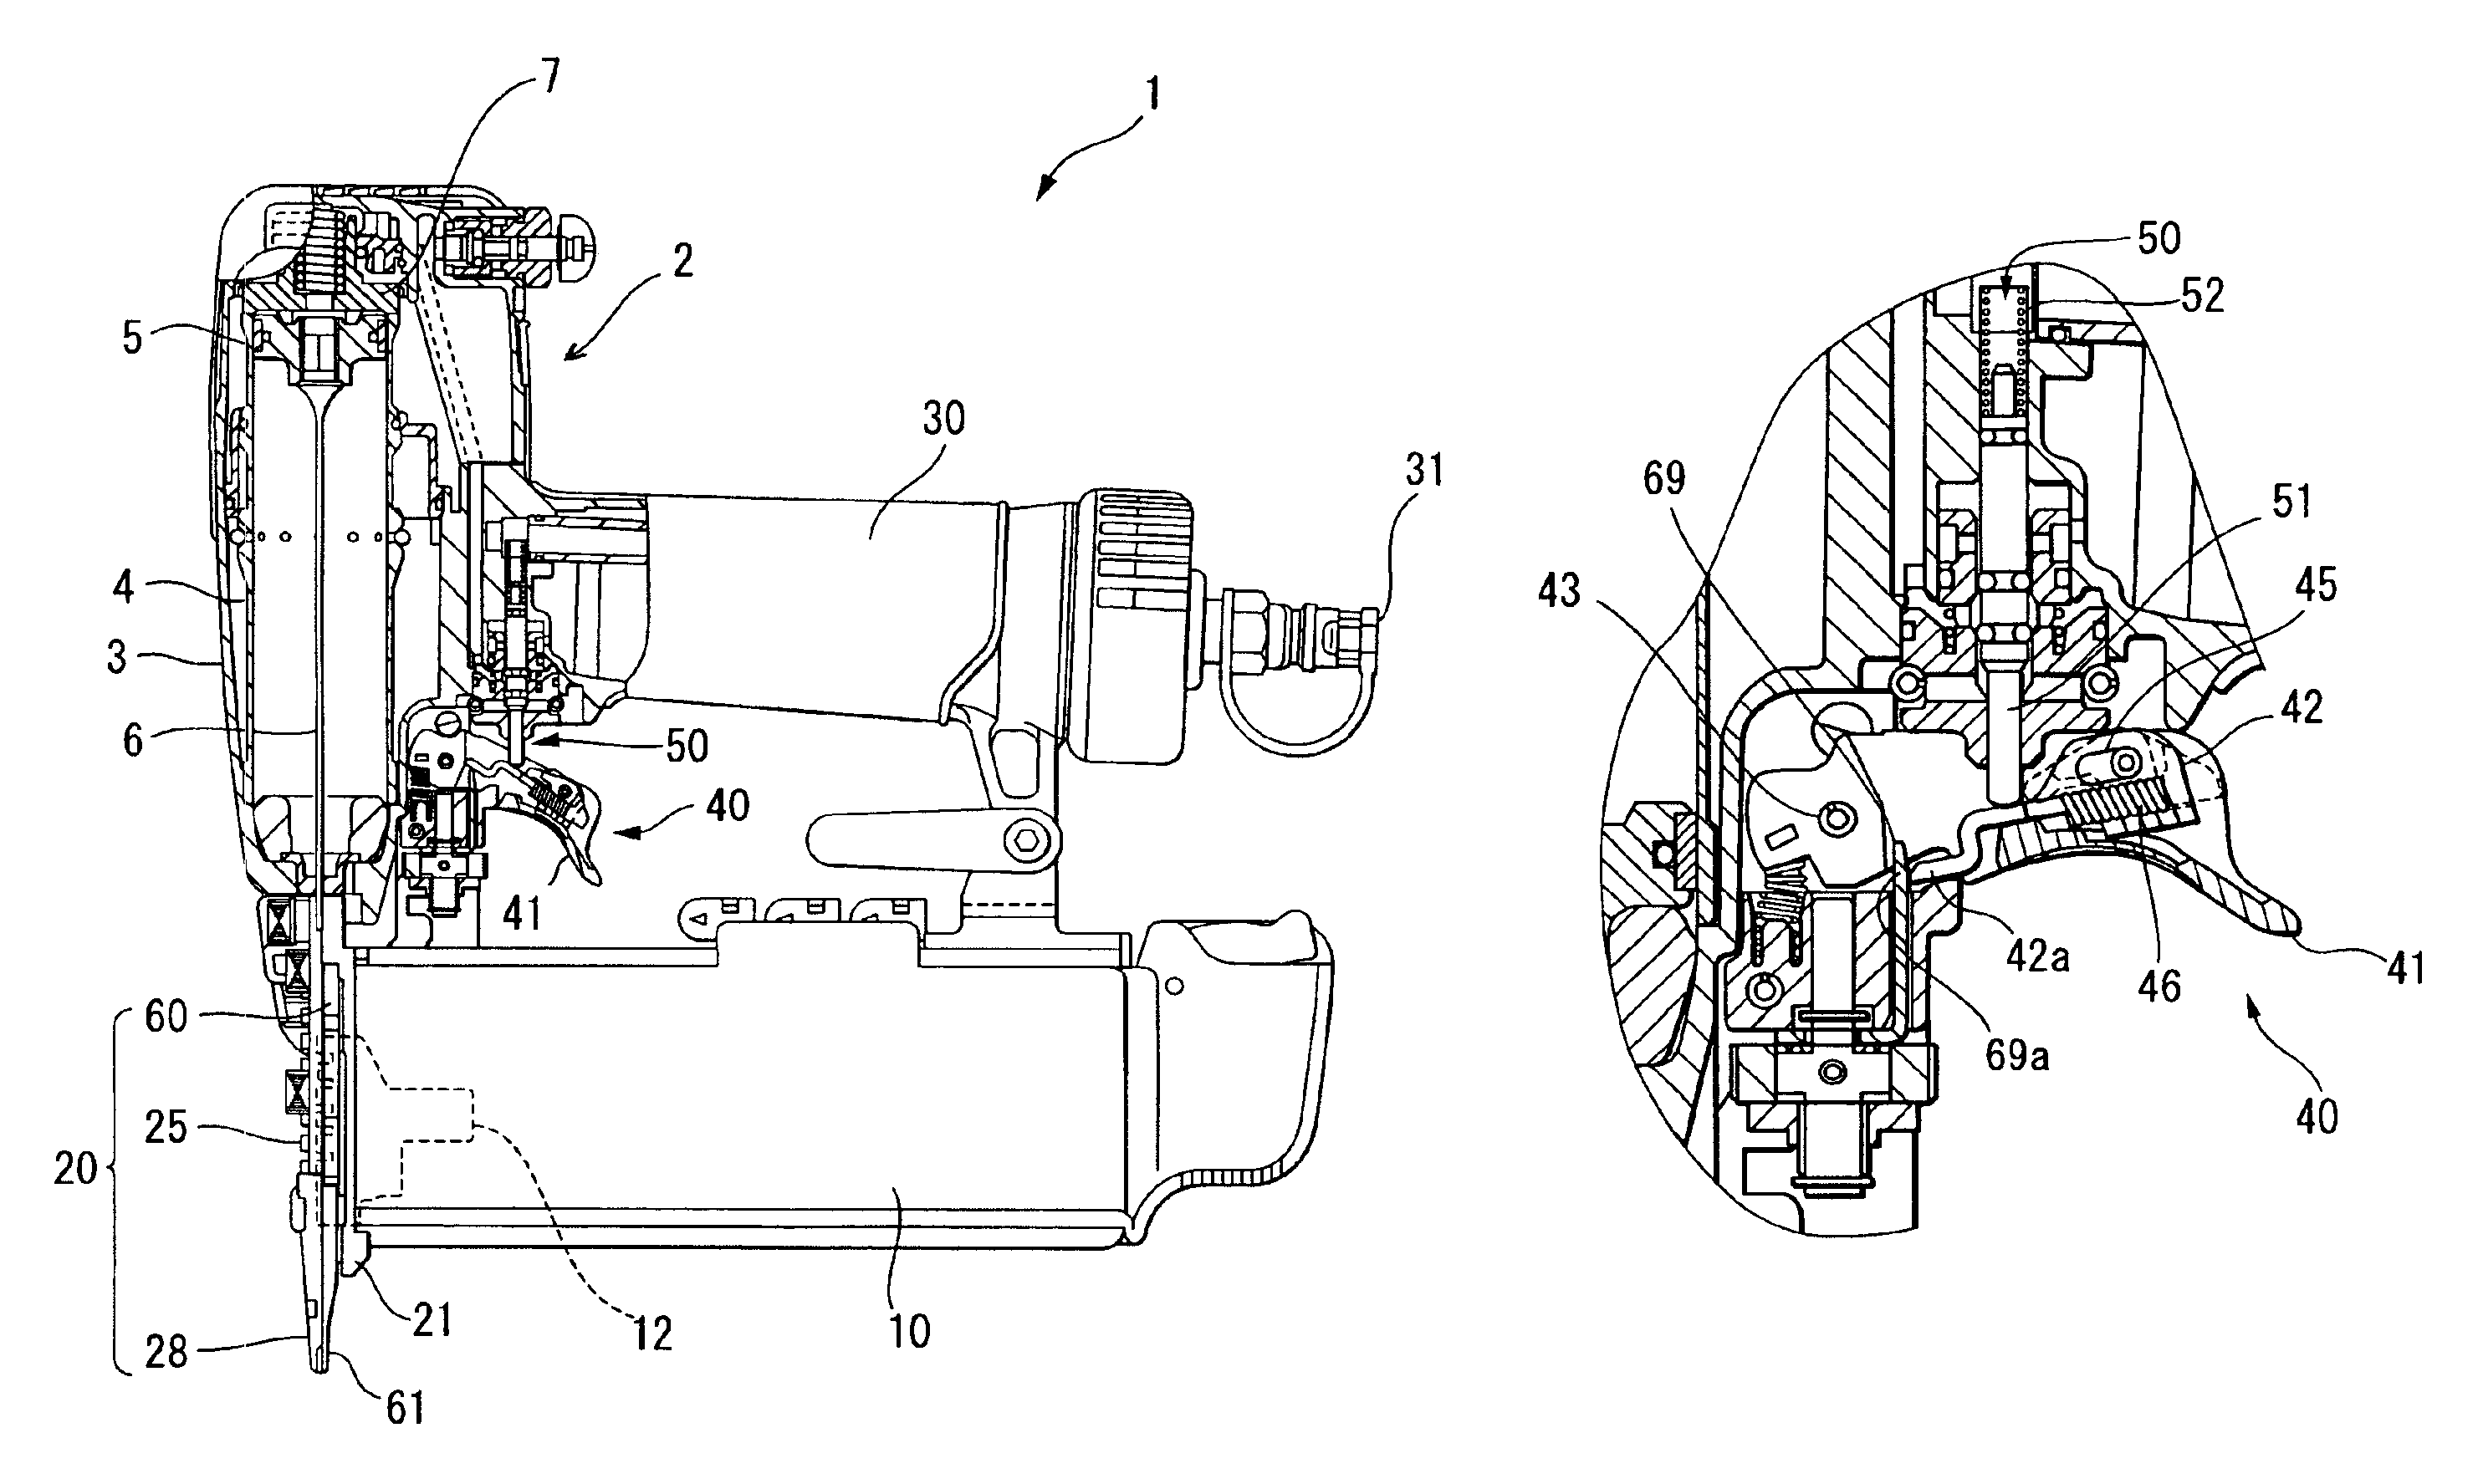 Fastener driving tool having contact arm in contact with workpiece